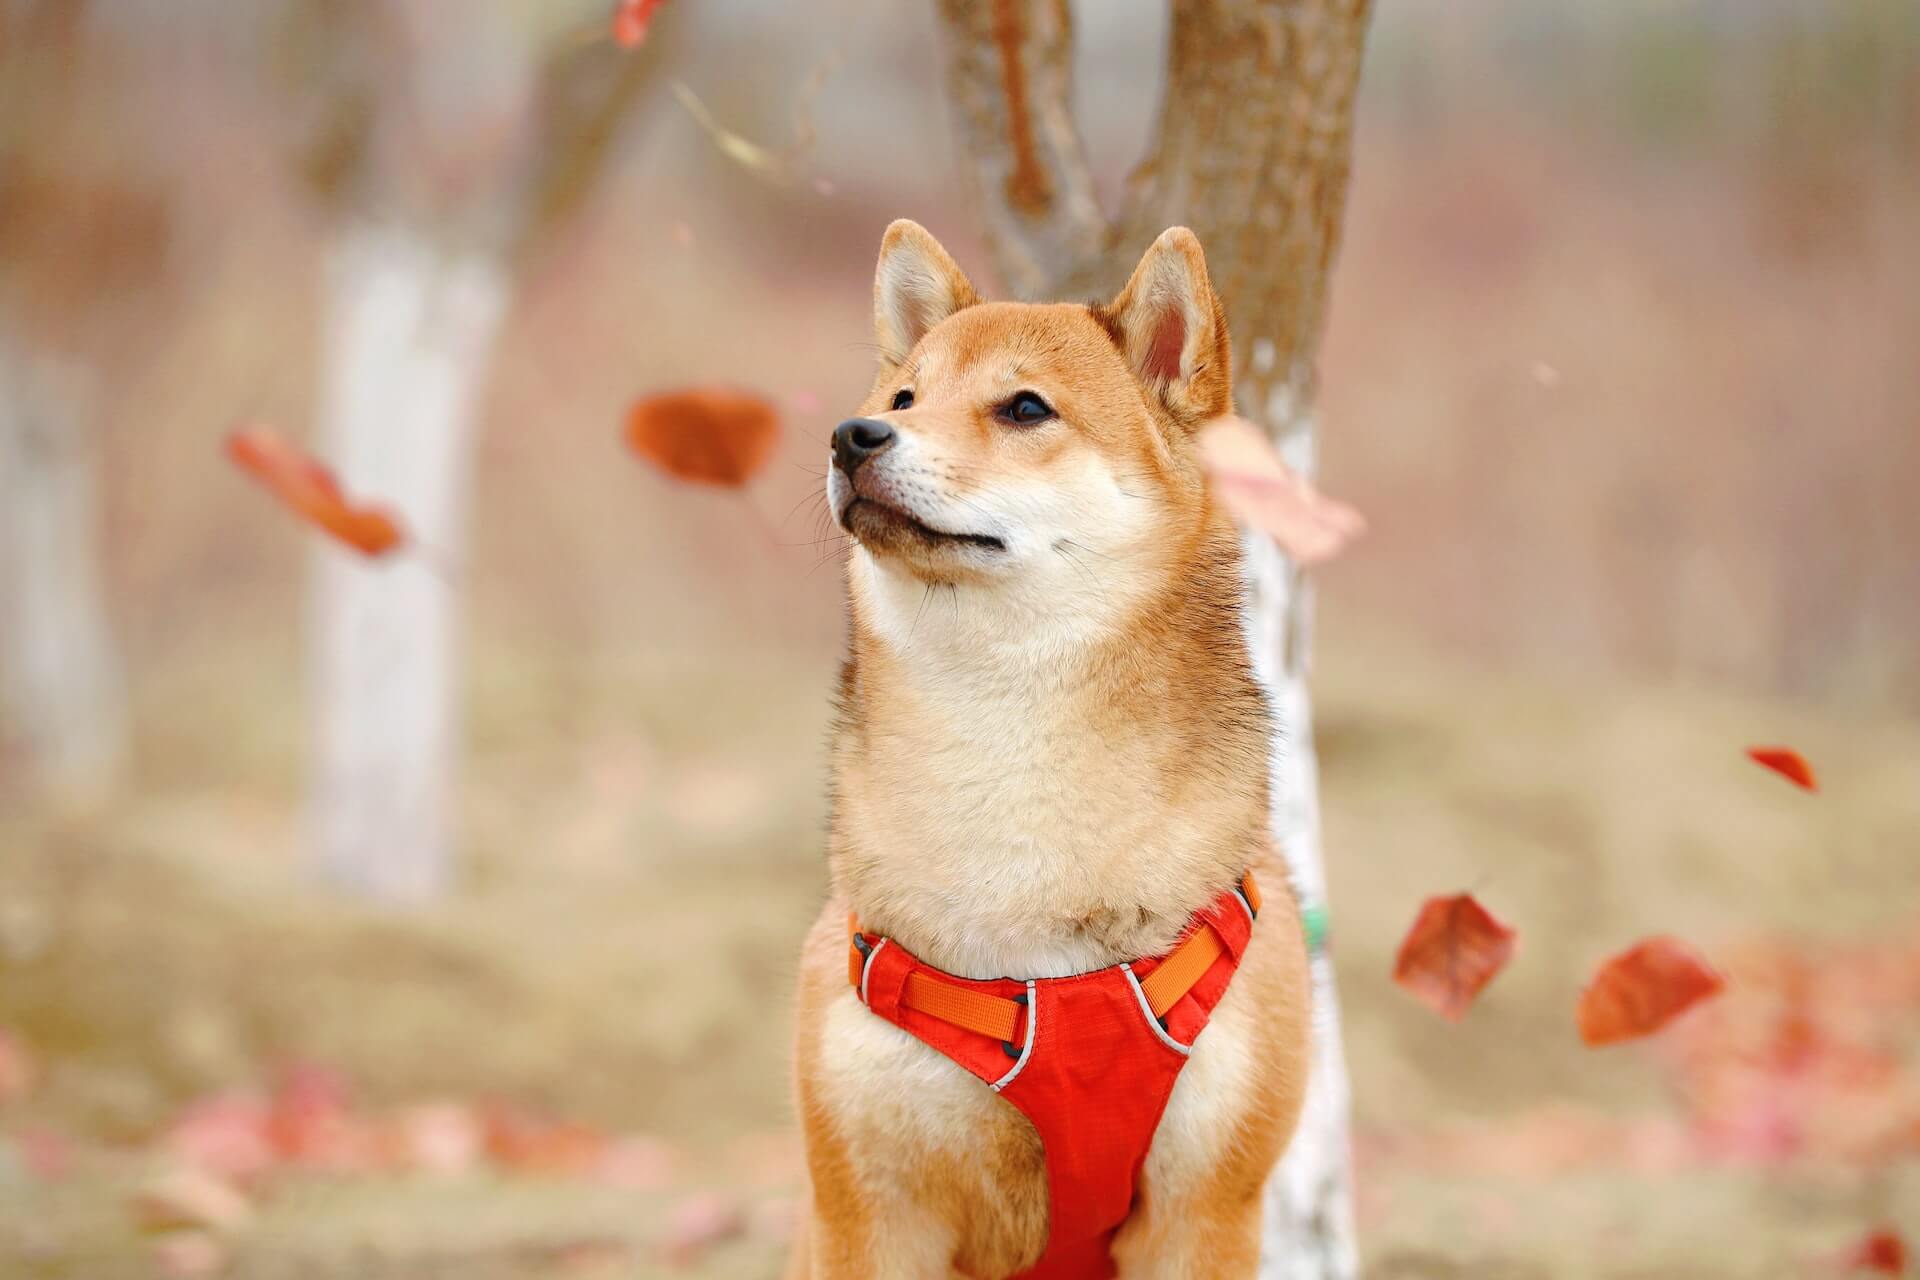 Enigma of the East: A Roundup of Asian Dog Breeds